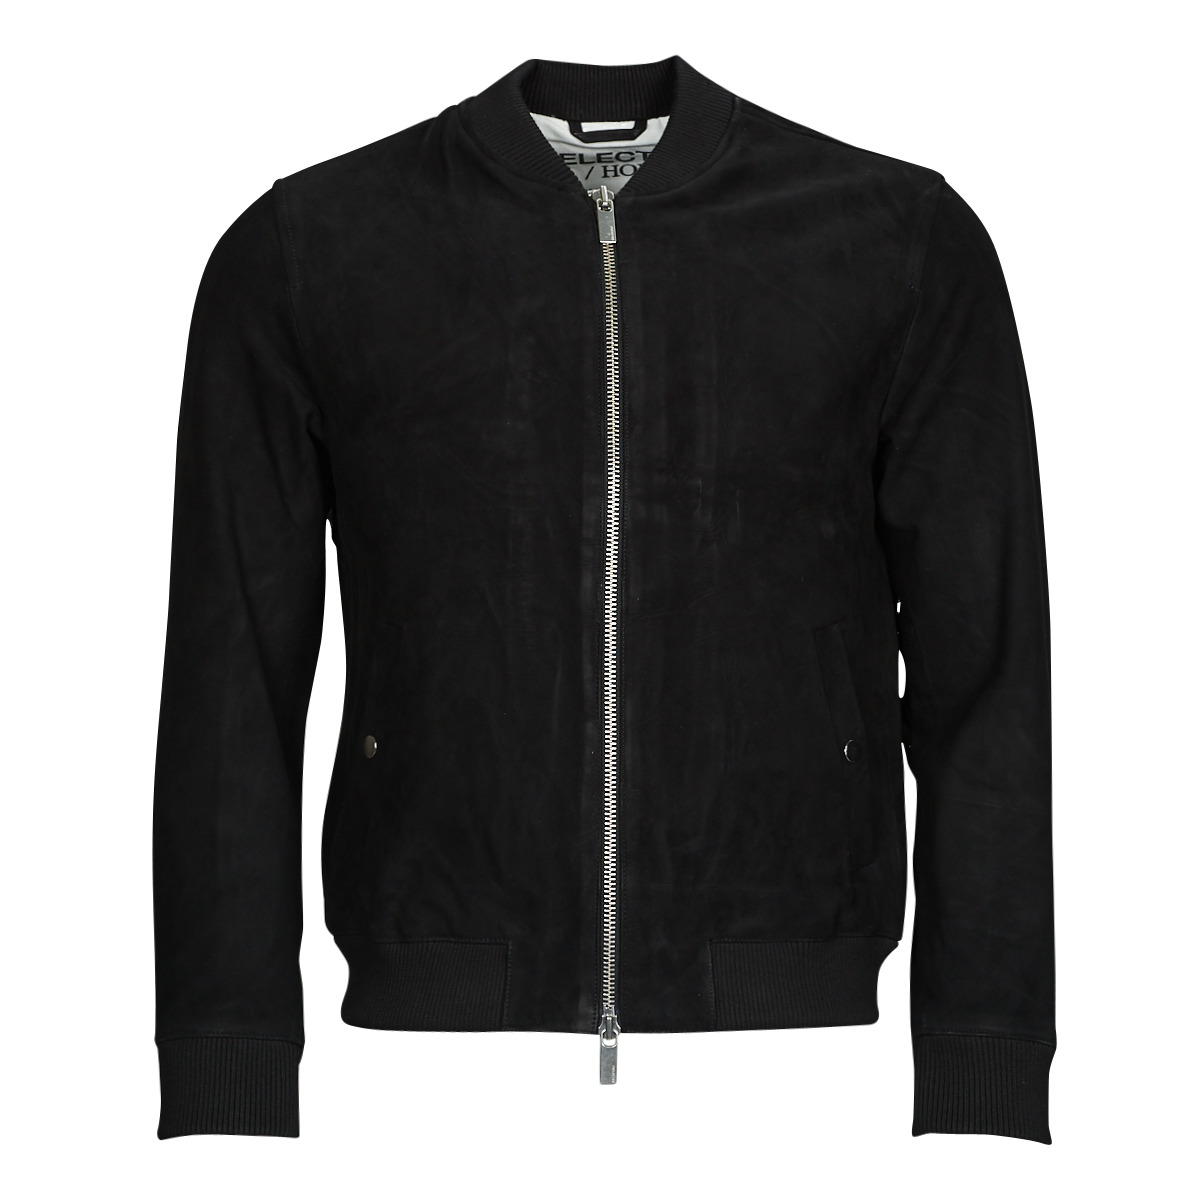 Selected Noir SLHARCHIVE BOMBER SUEDE 4AkFncqH